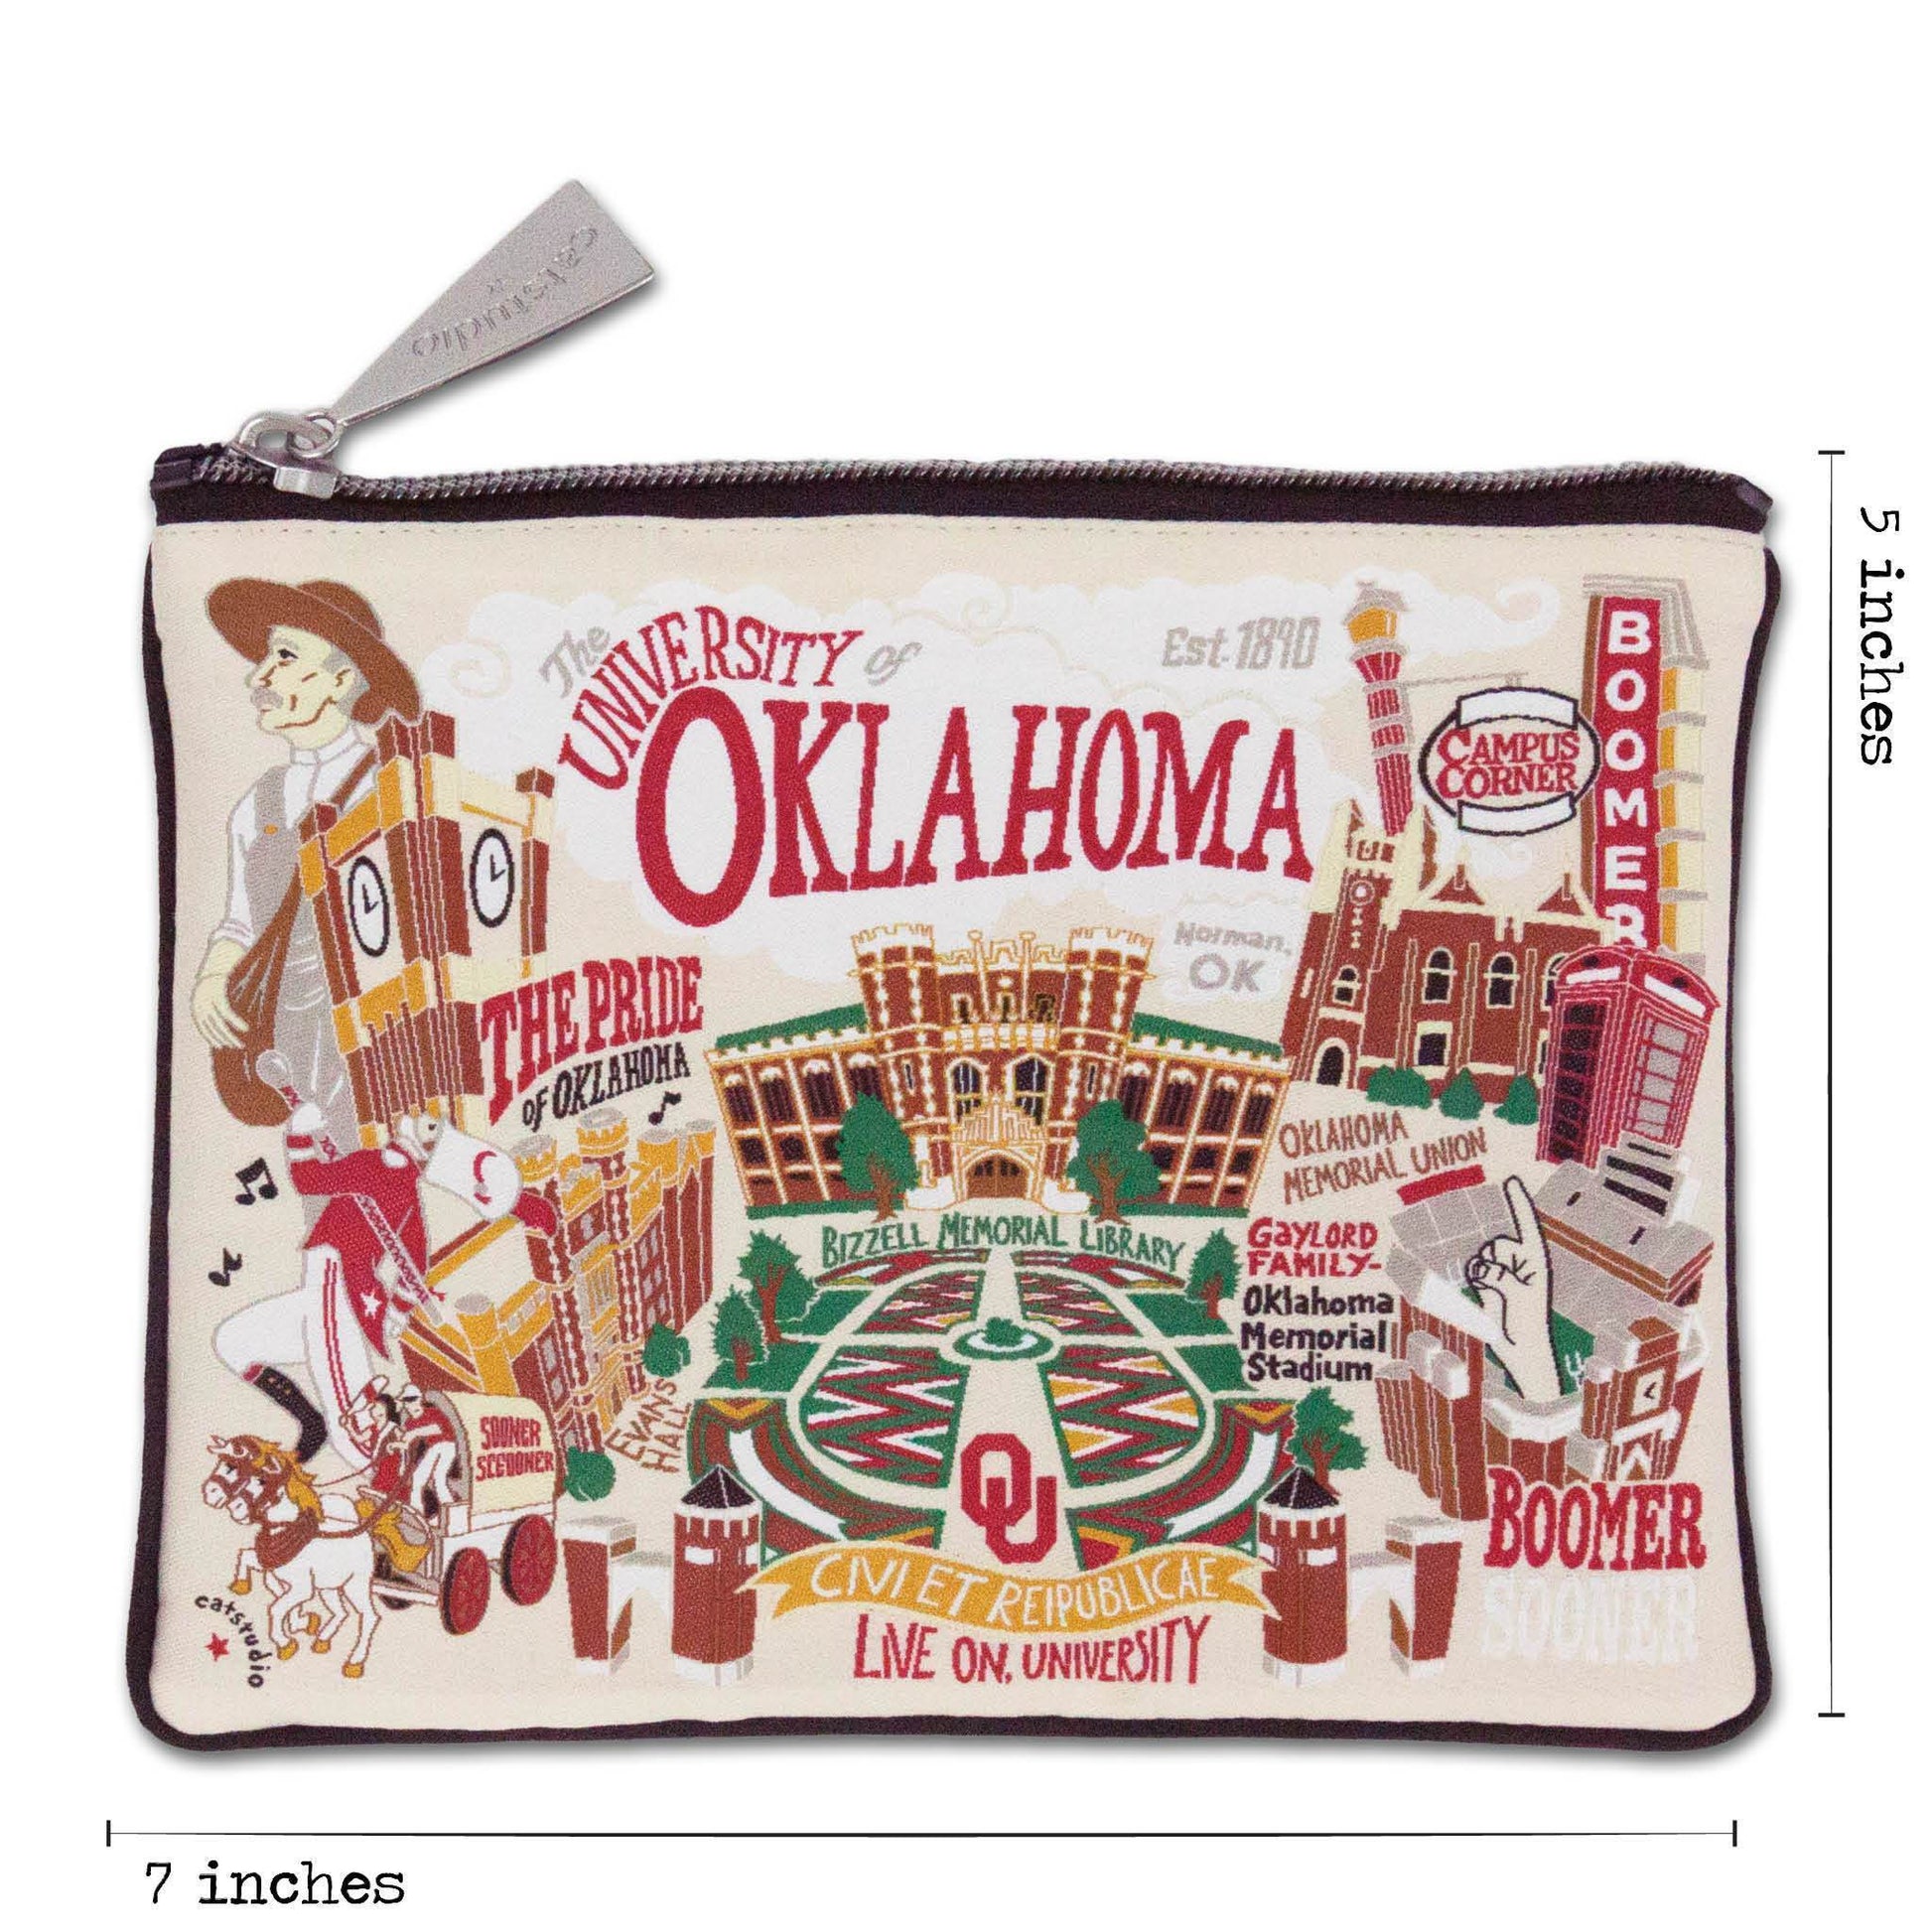 Oklahoma of University OU Sooners Zipper pouch dimensions